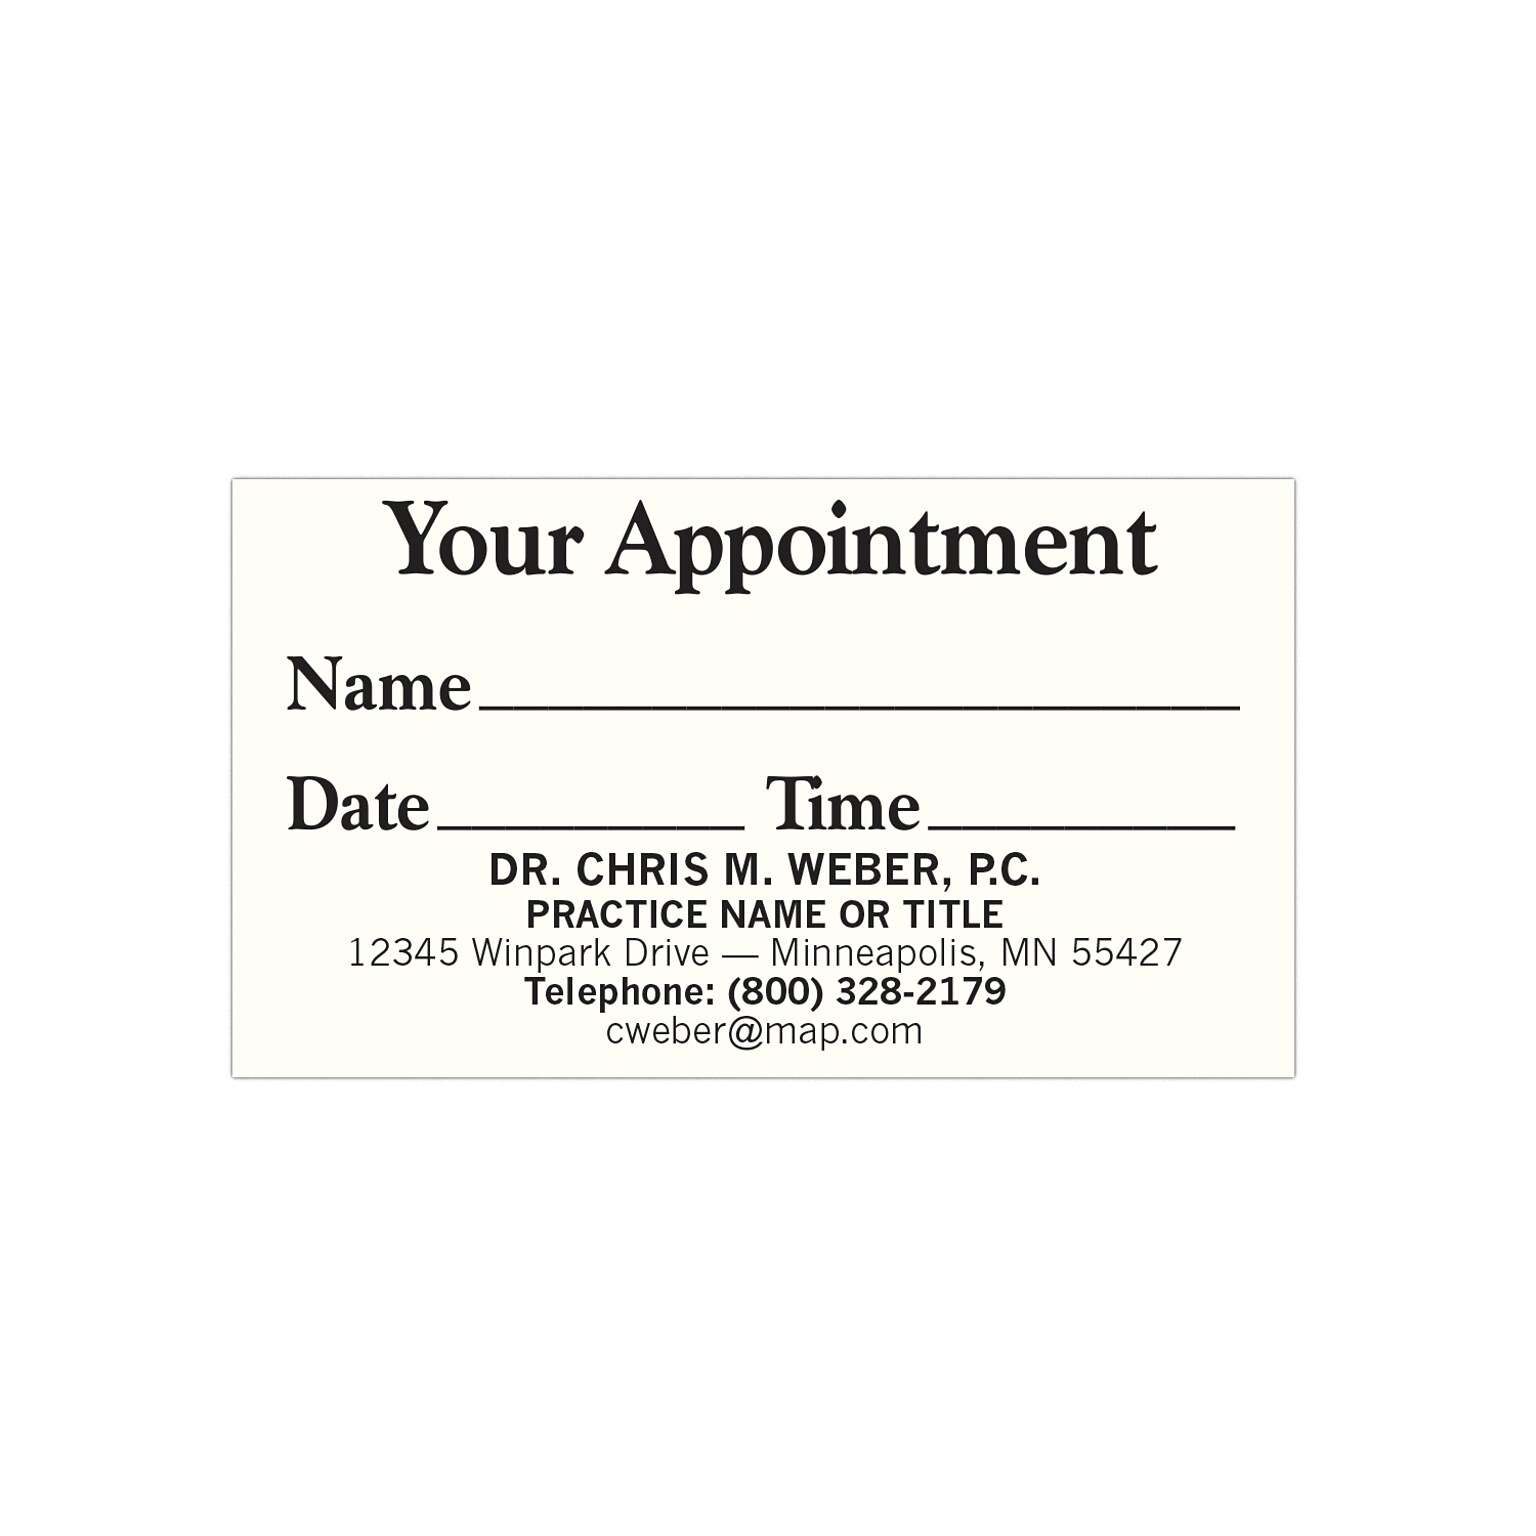 Custom 1-2 Color Appointment Cards, CLASSIC CREST® Natural White 80#, Flat Print, 1 Standard Ink, 1-Sided, 250/Pk